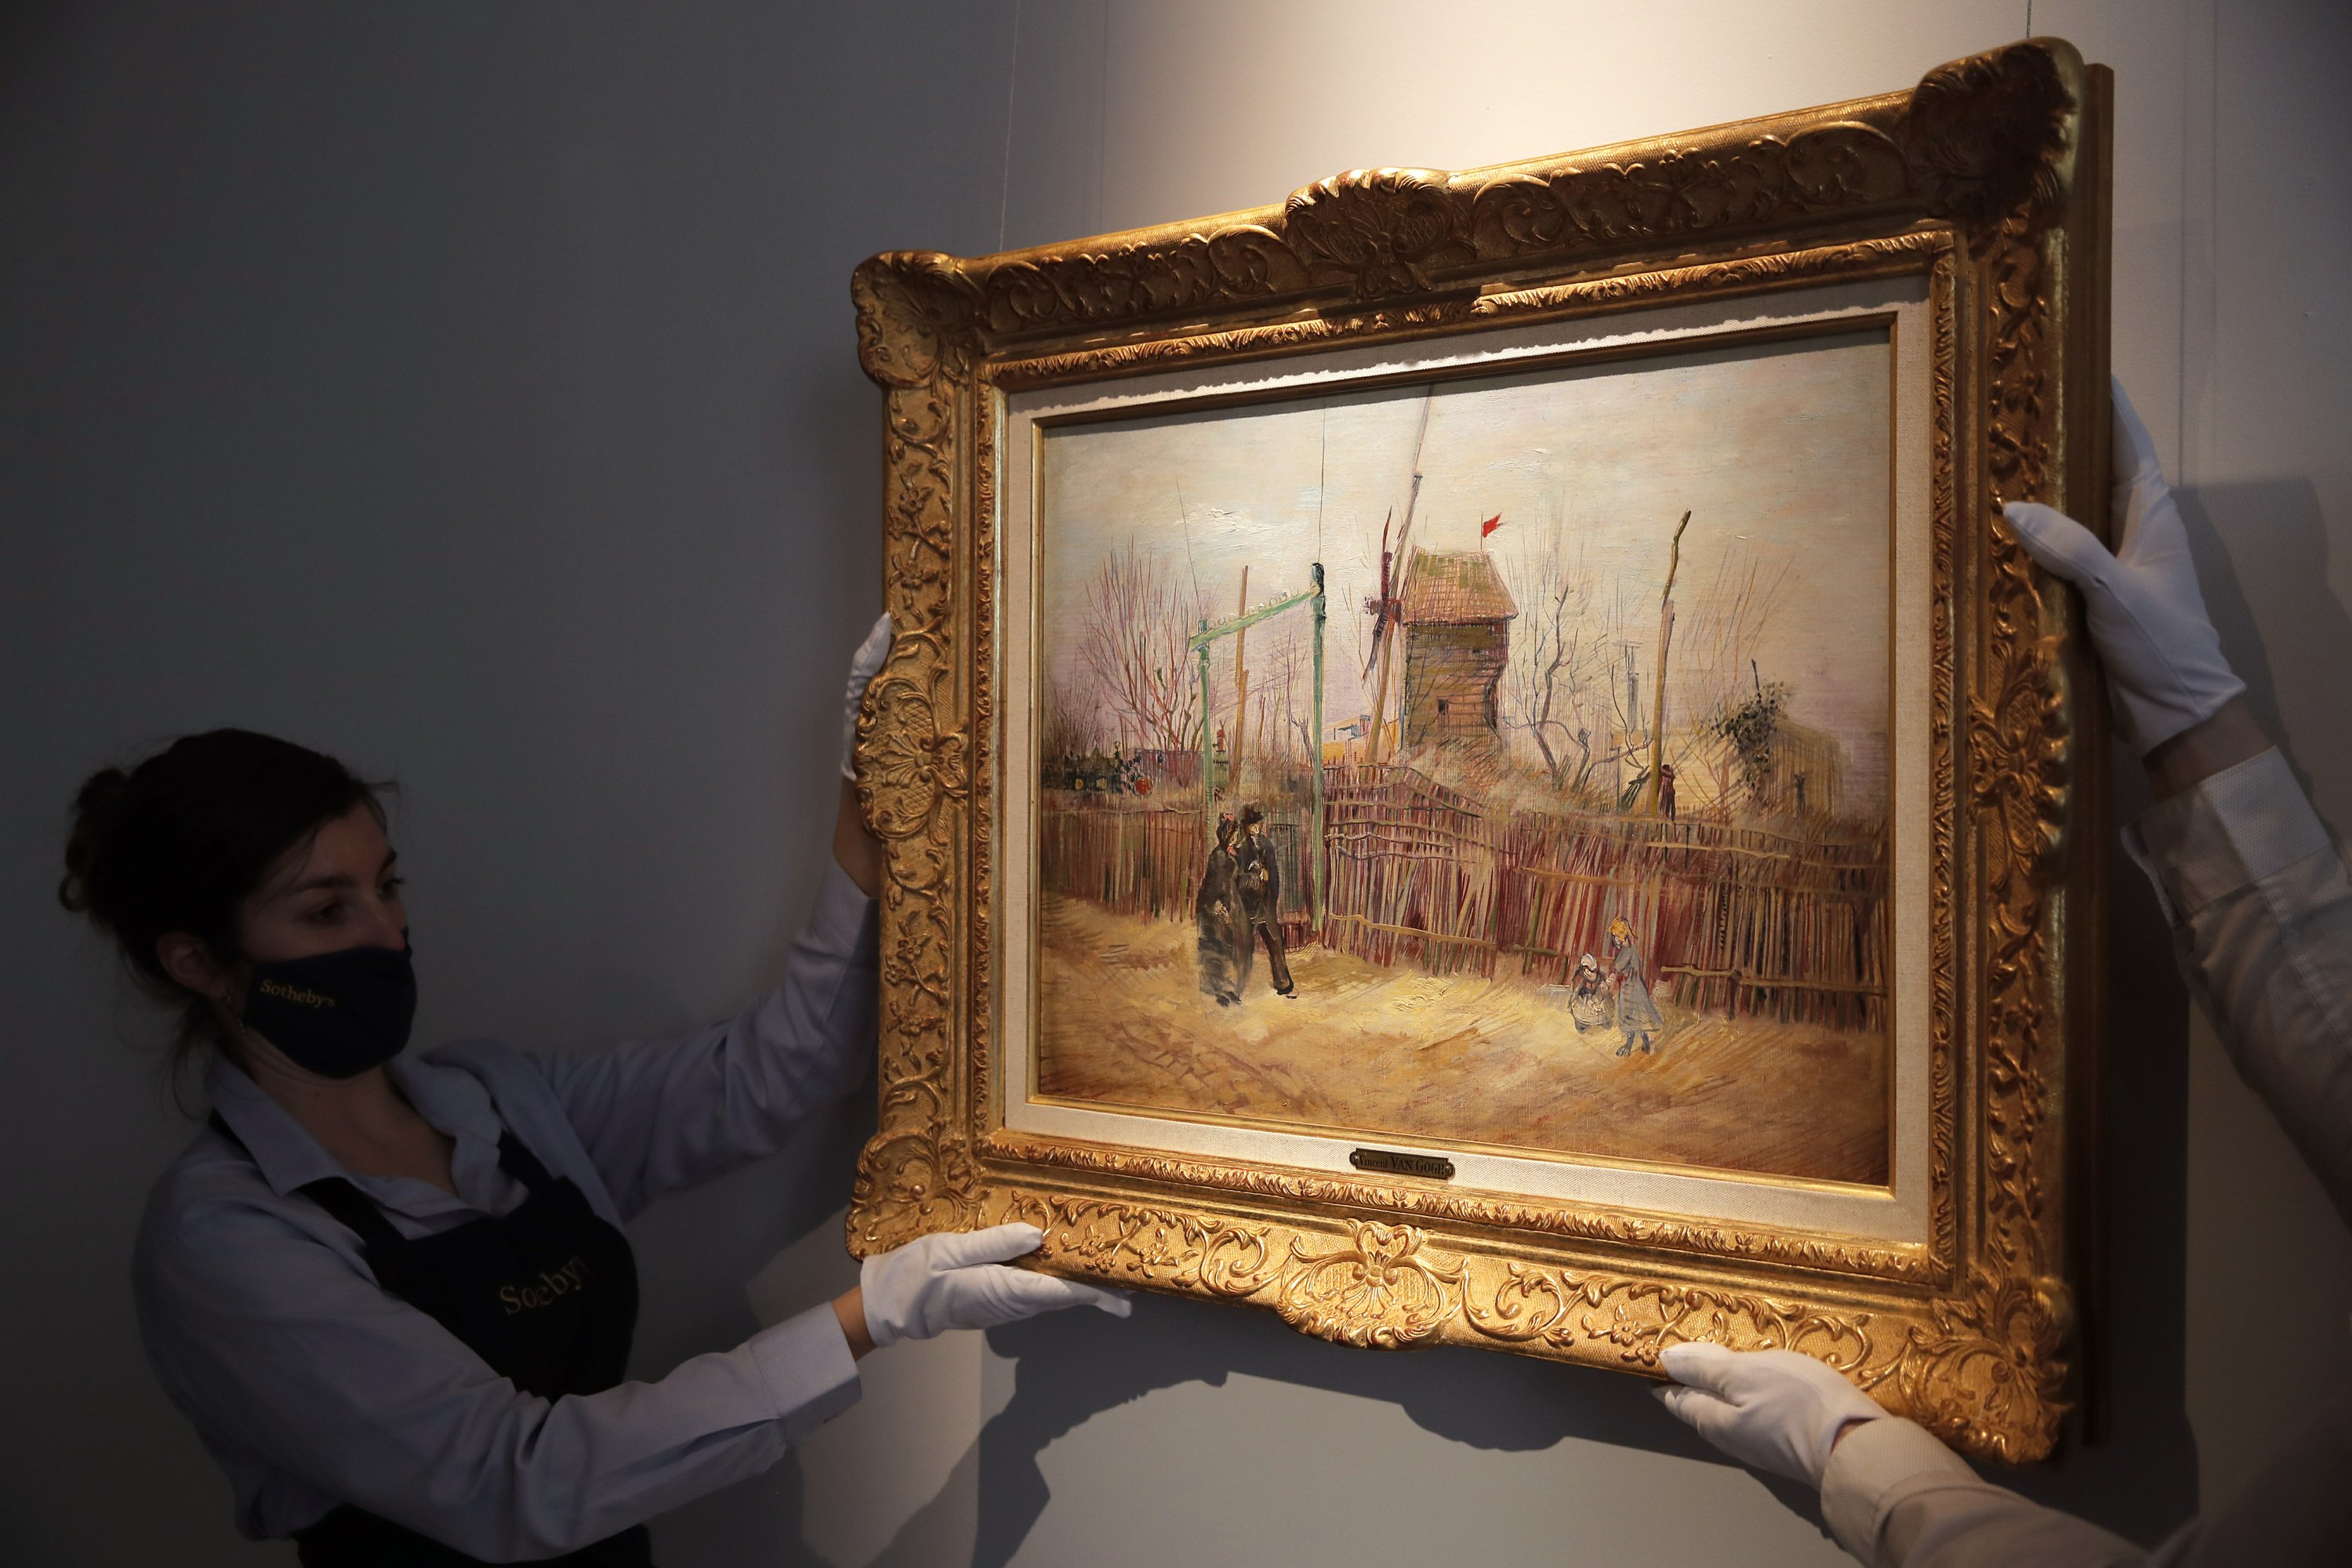 Rarely seen Van Gogh painting exhibited ahead of auction - Associated Press